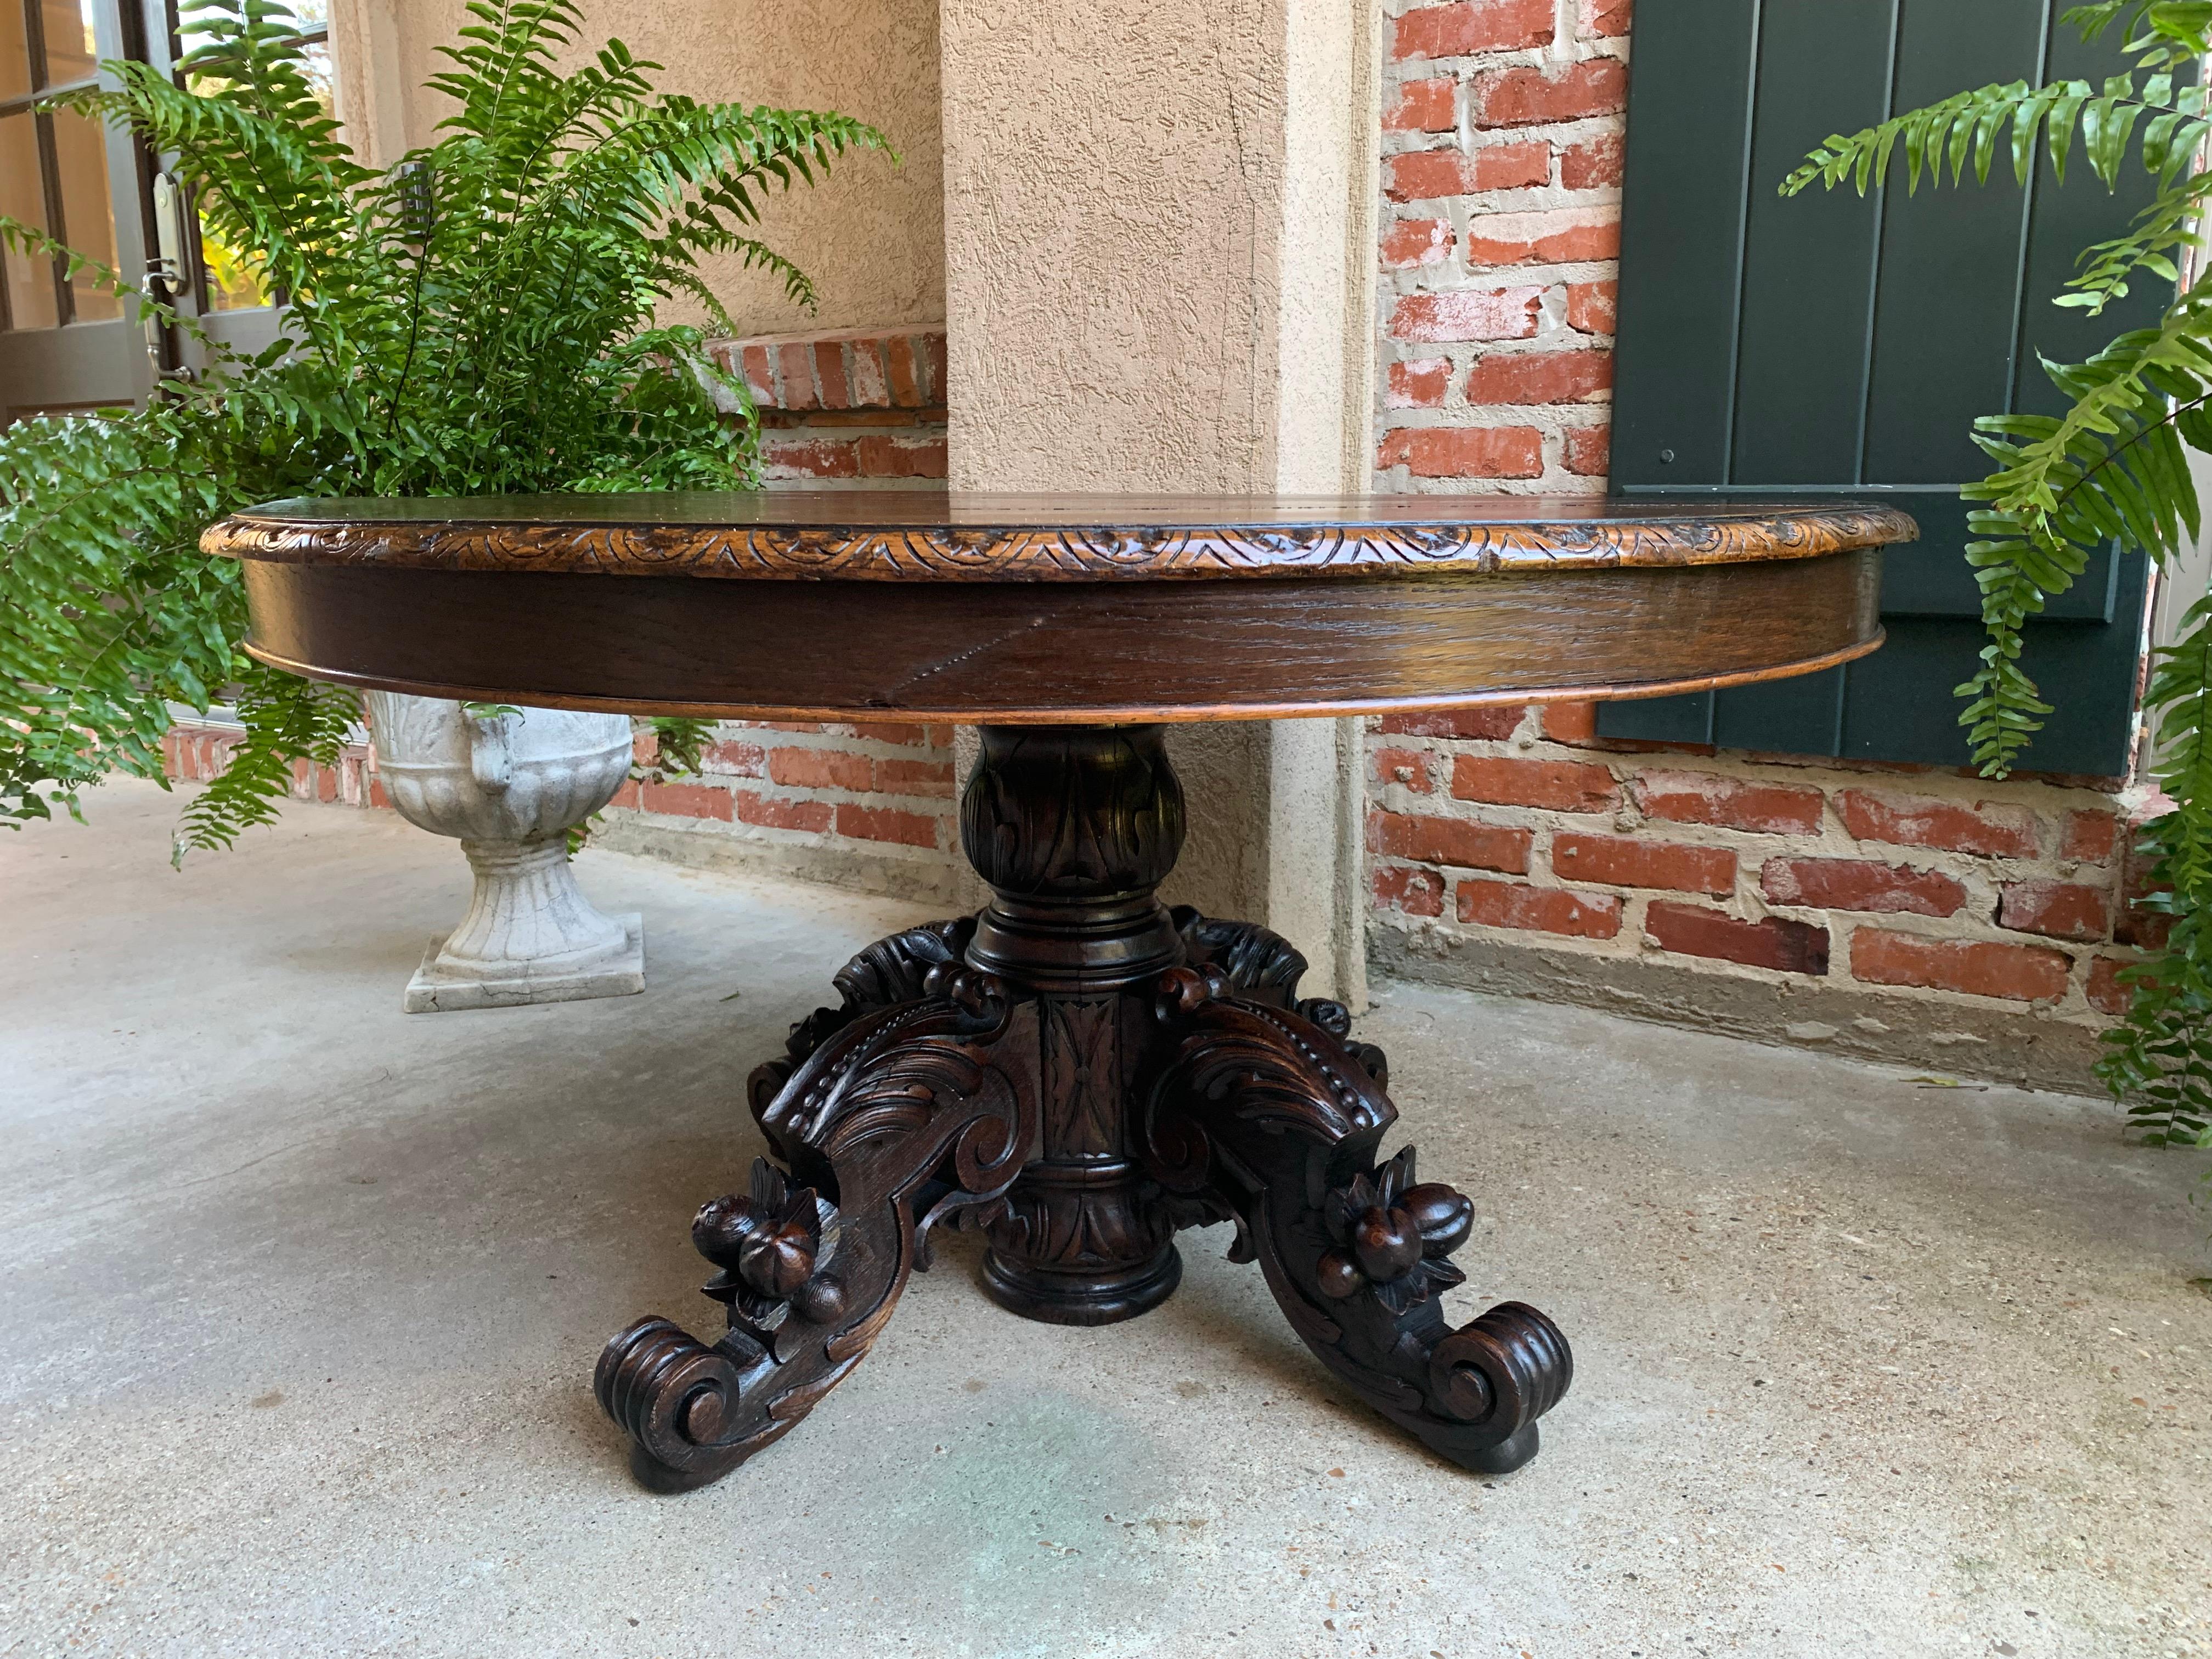 Antique French carved oak hunt coffee table renaissance black forest oval c1900

~Direct from France~
~Absolutely stunning antique French carved Black Forest oval coffee table!~
~Massive carved pedestal base supported by ornate hand carved